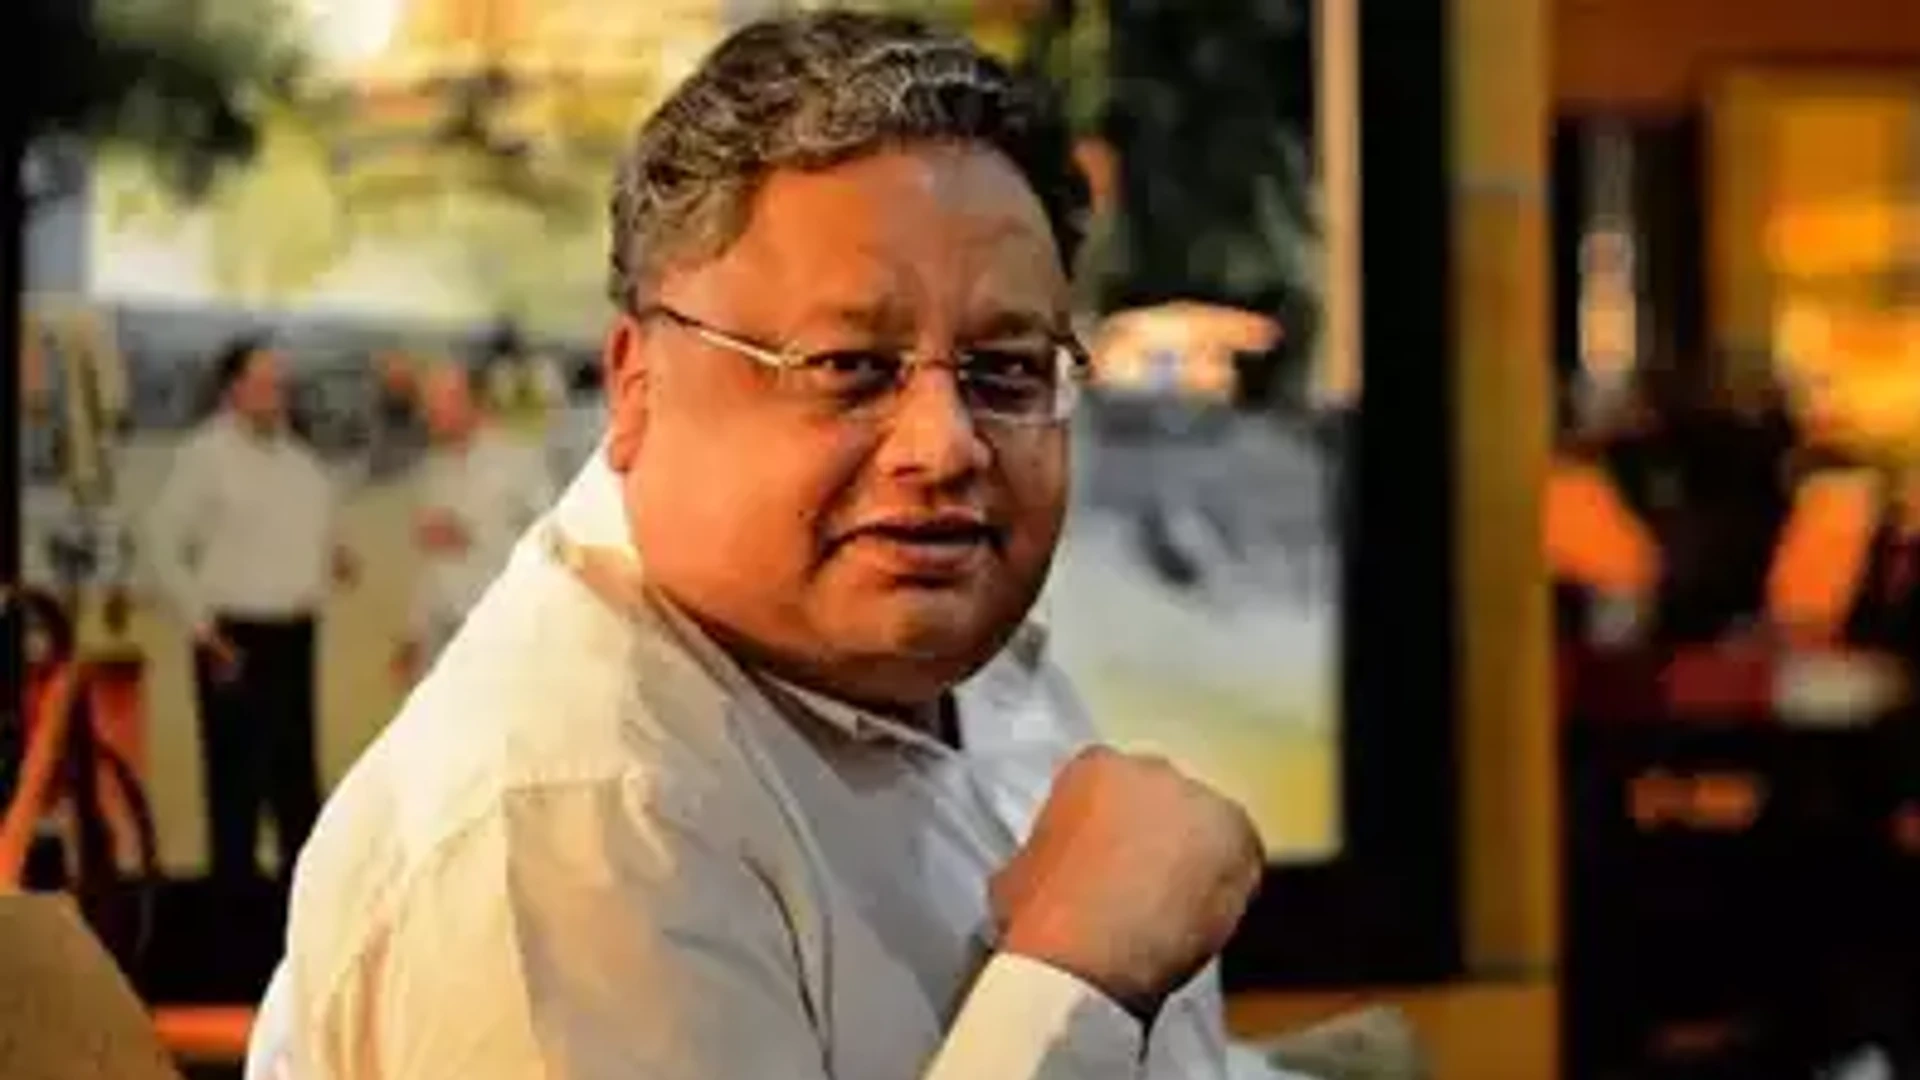 Unmissable Investment Lessons From Rakesh Jhunjhunwala: India’s Richest Self-Made Investor, Billionaire